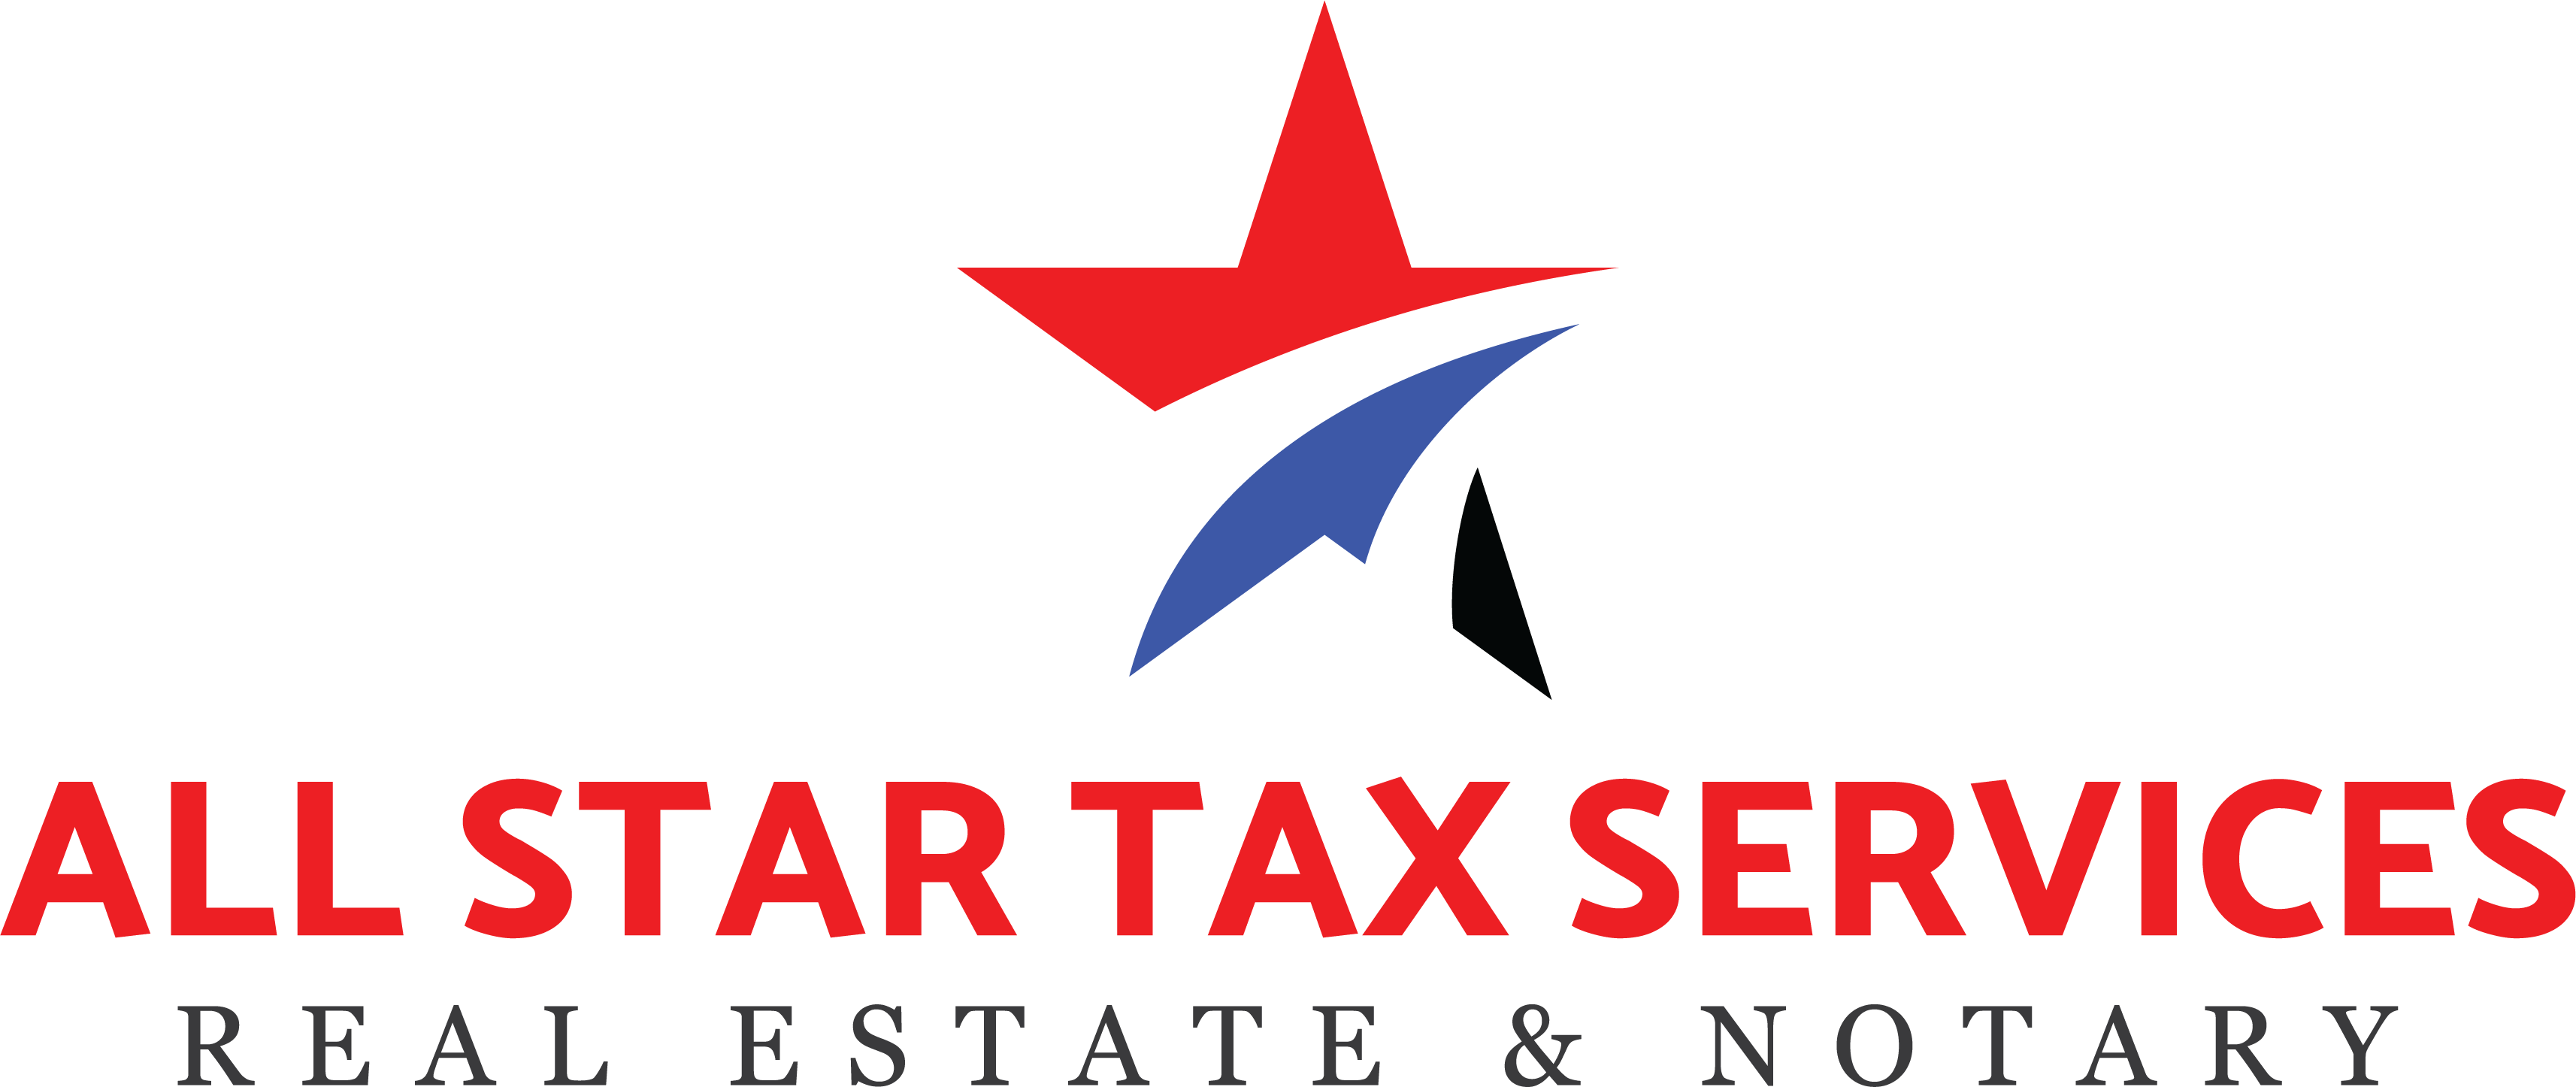 All Star Tax Services